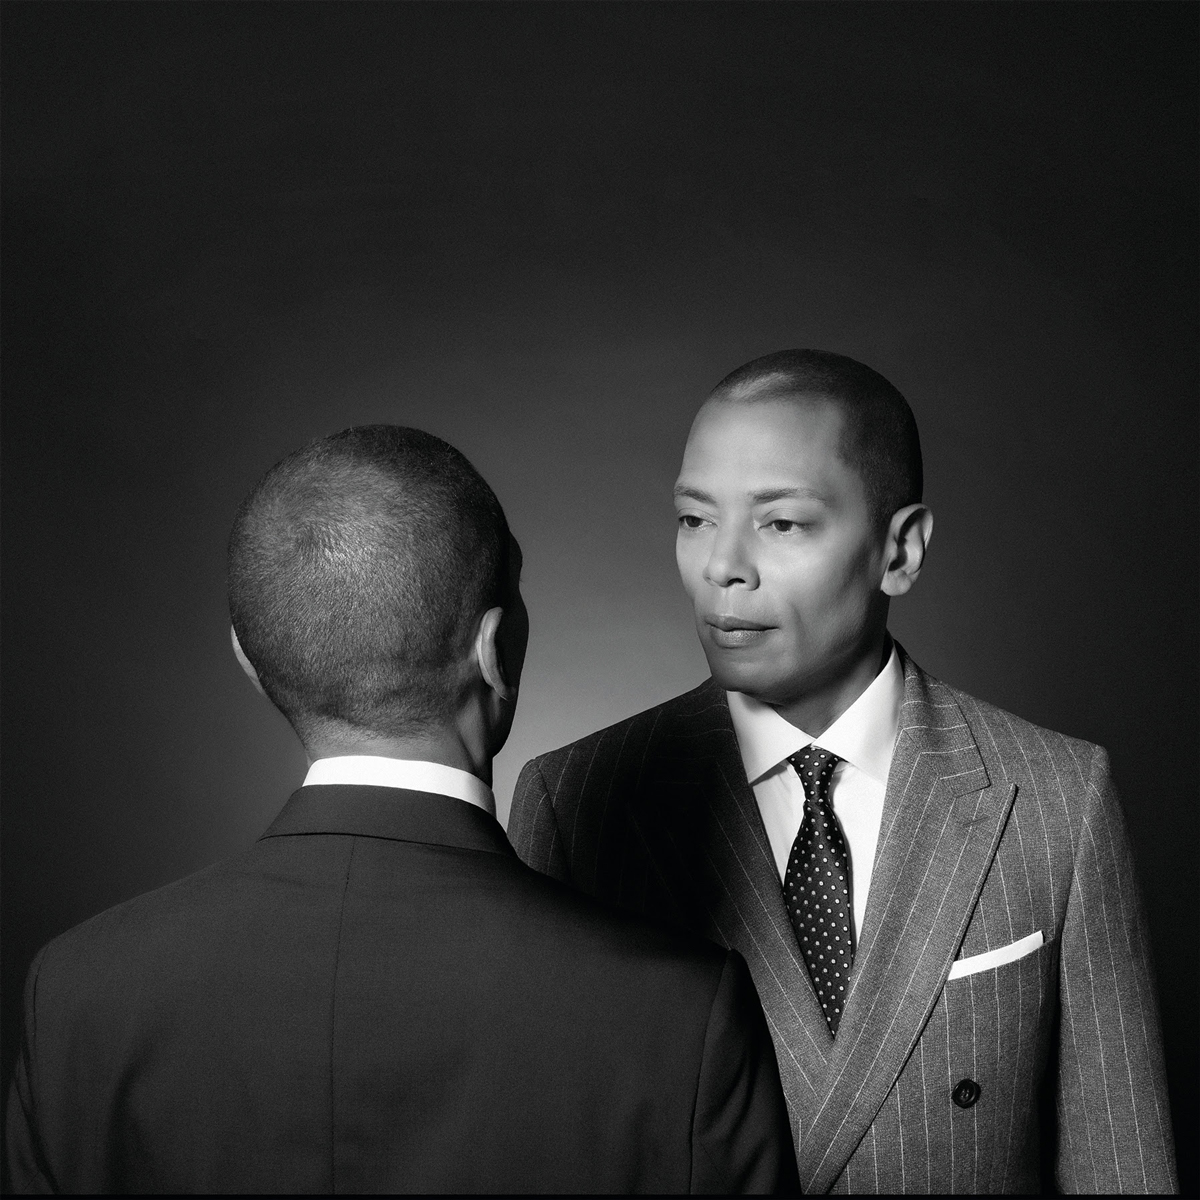 Jeff Mills releasing two new albums this spring